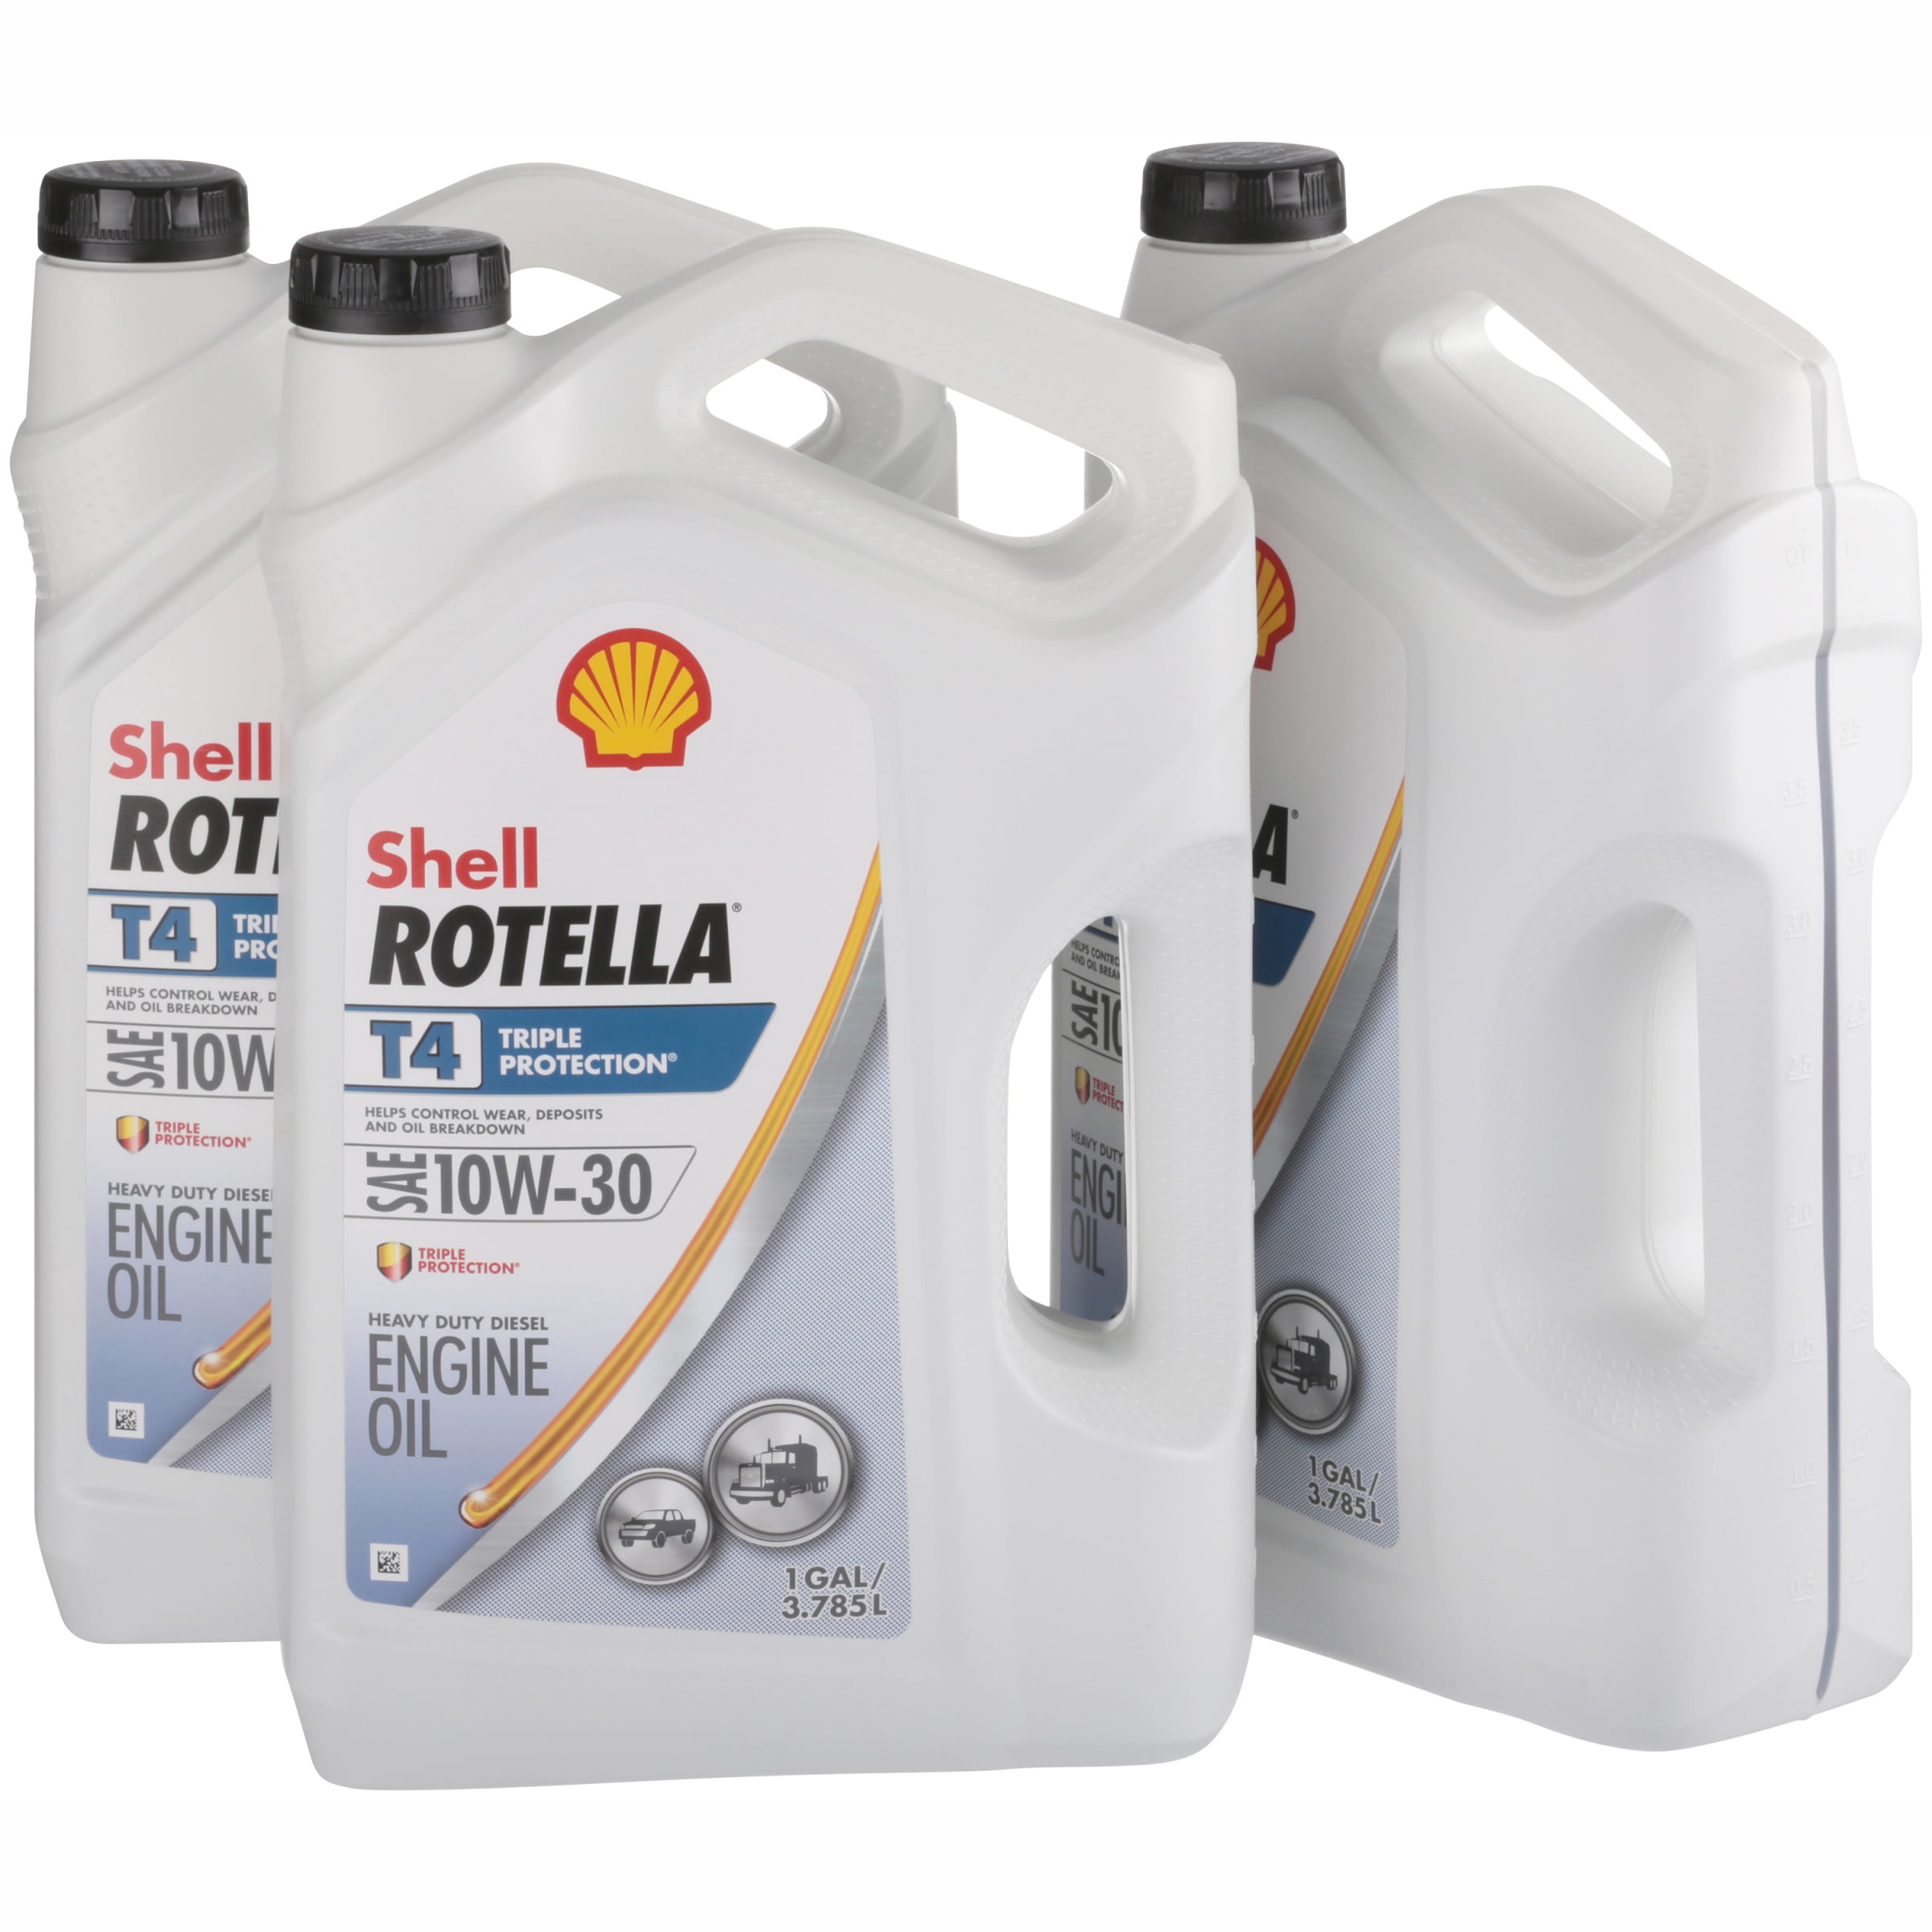 Shell Rotella T4 Triple Protection 10W-30 Diesel Motor Oil, 1 Gallon, 3 .